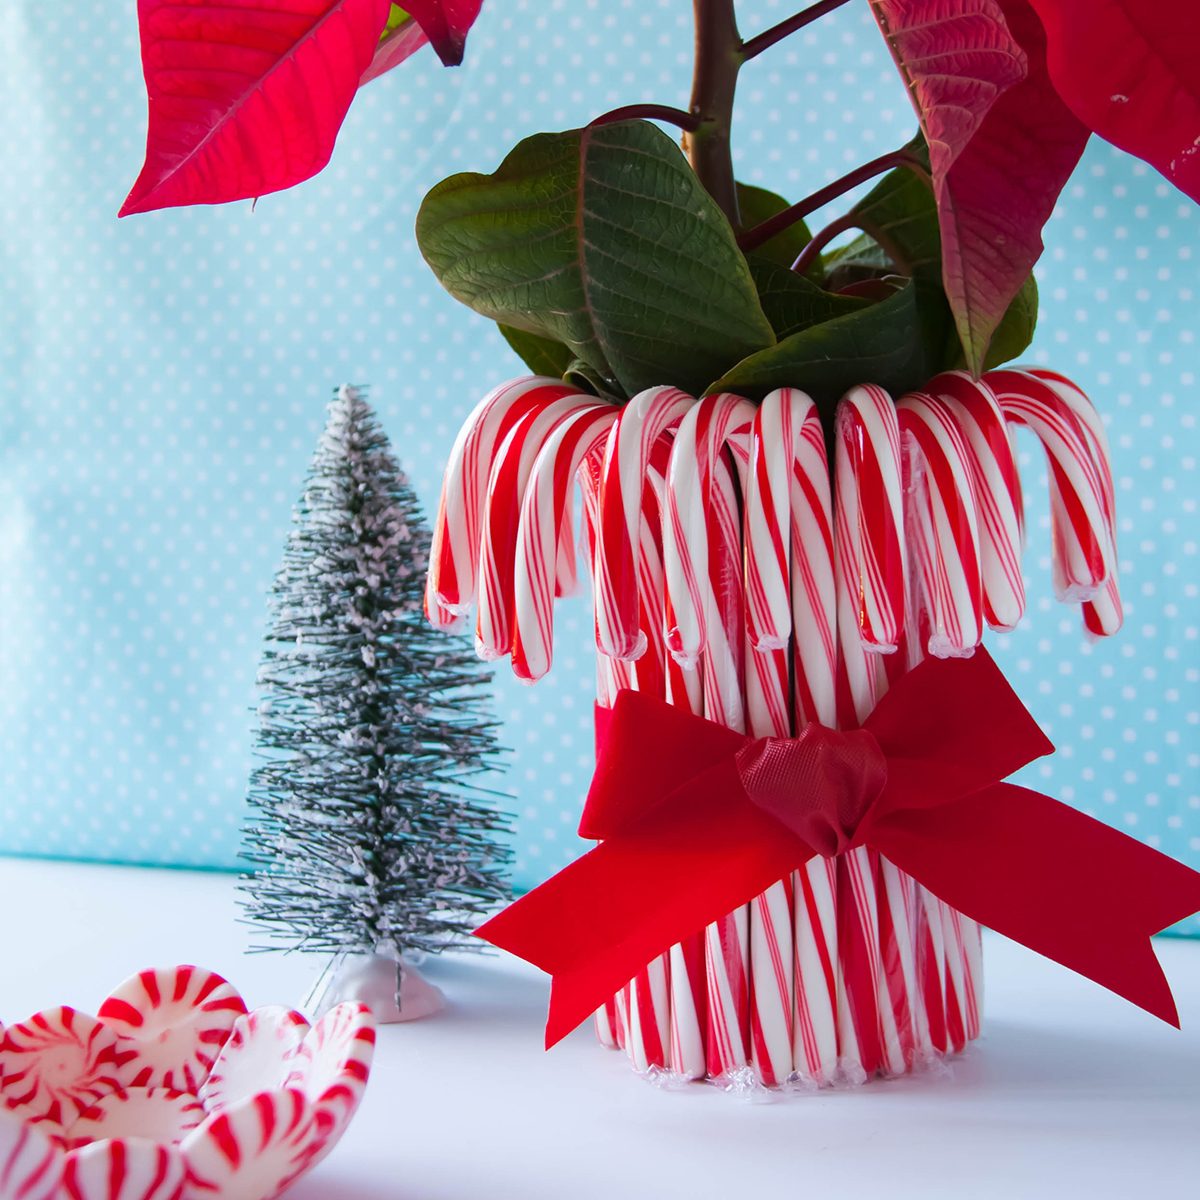 centerpieces with candy cane theme